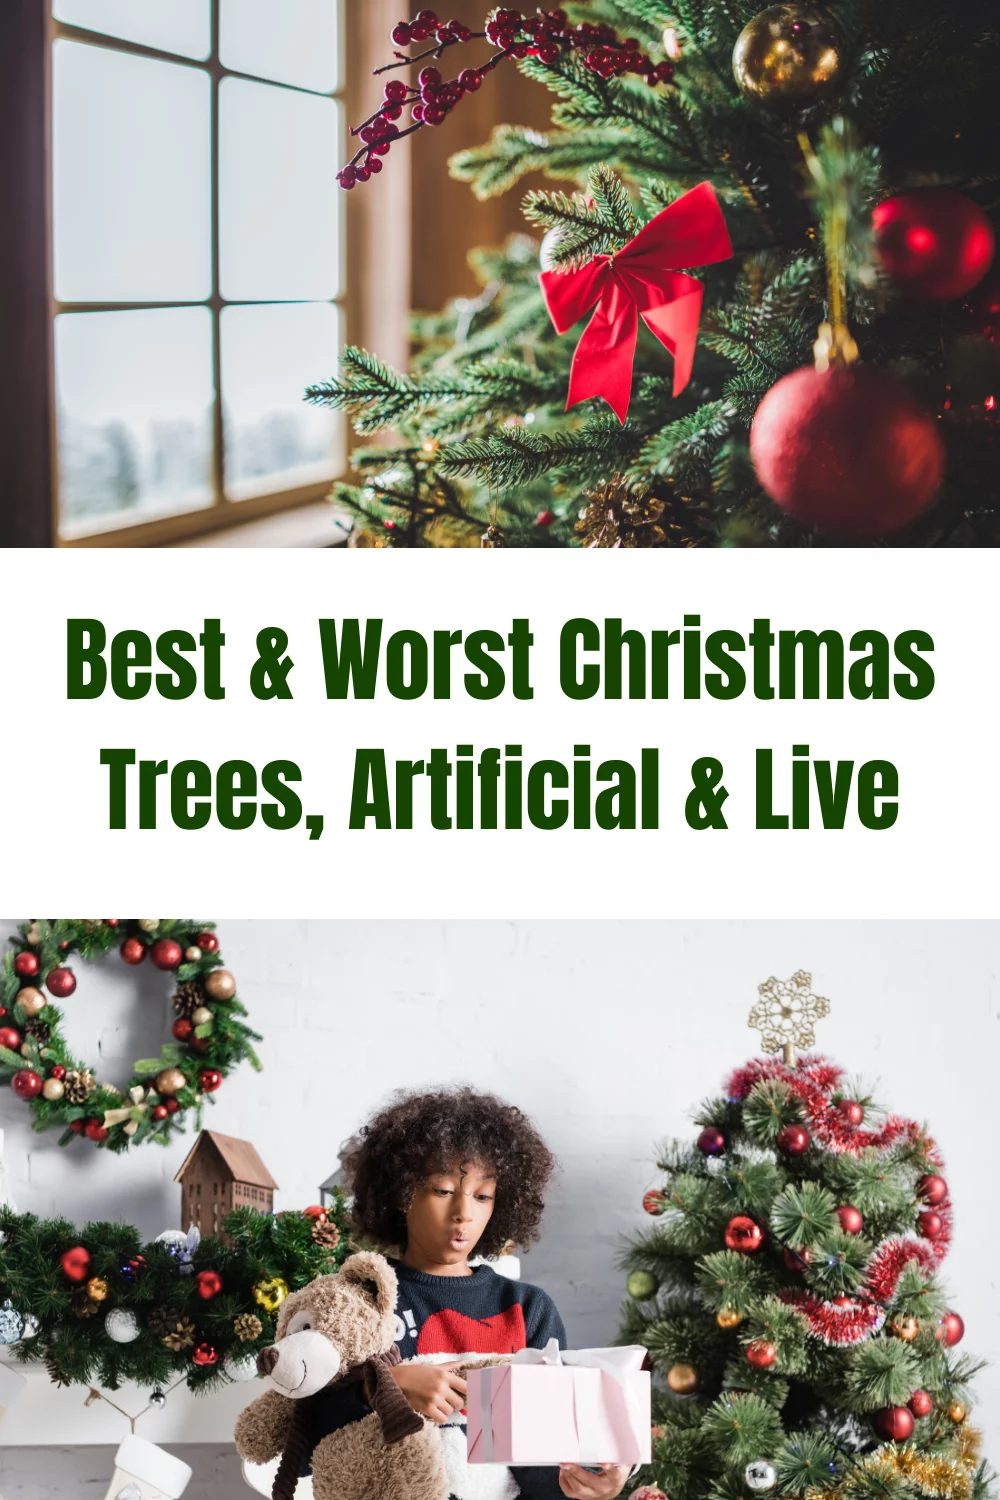 Best & Worst Christmas Trees, Artificial & Live